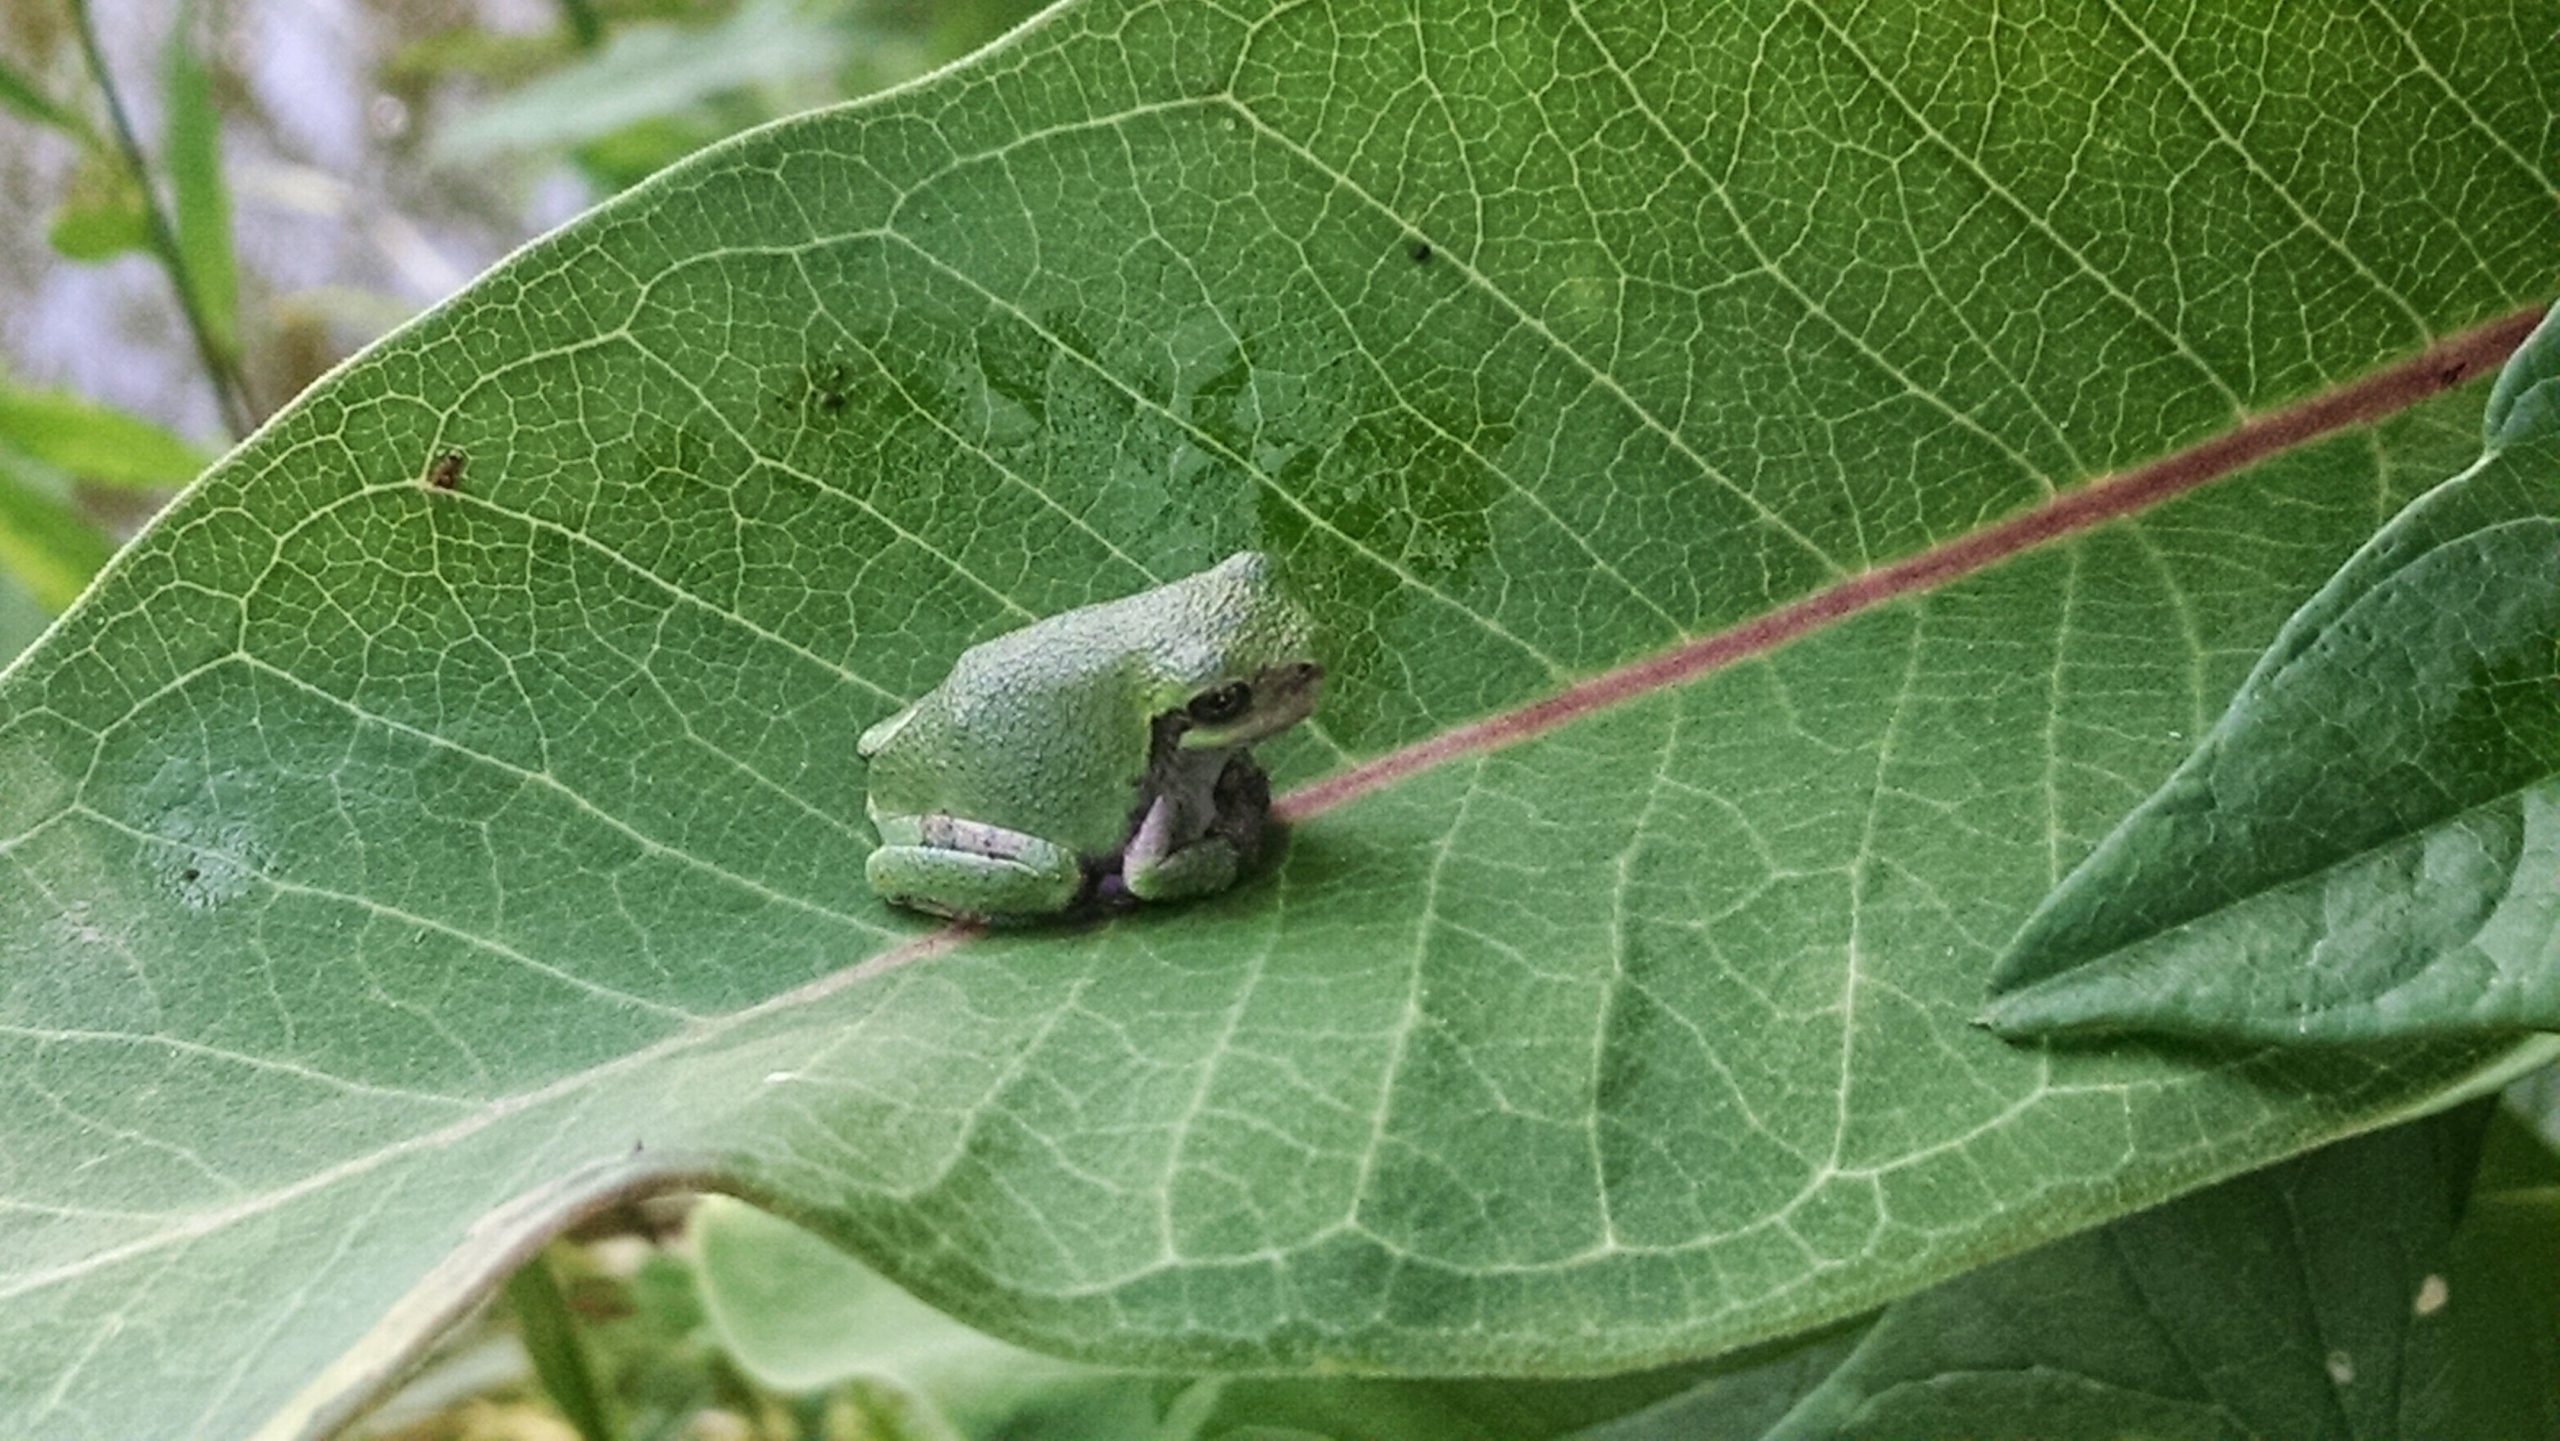 A small green frog resting upon a green leaf